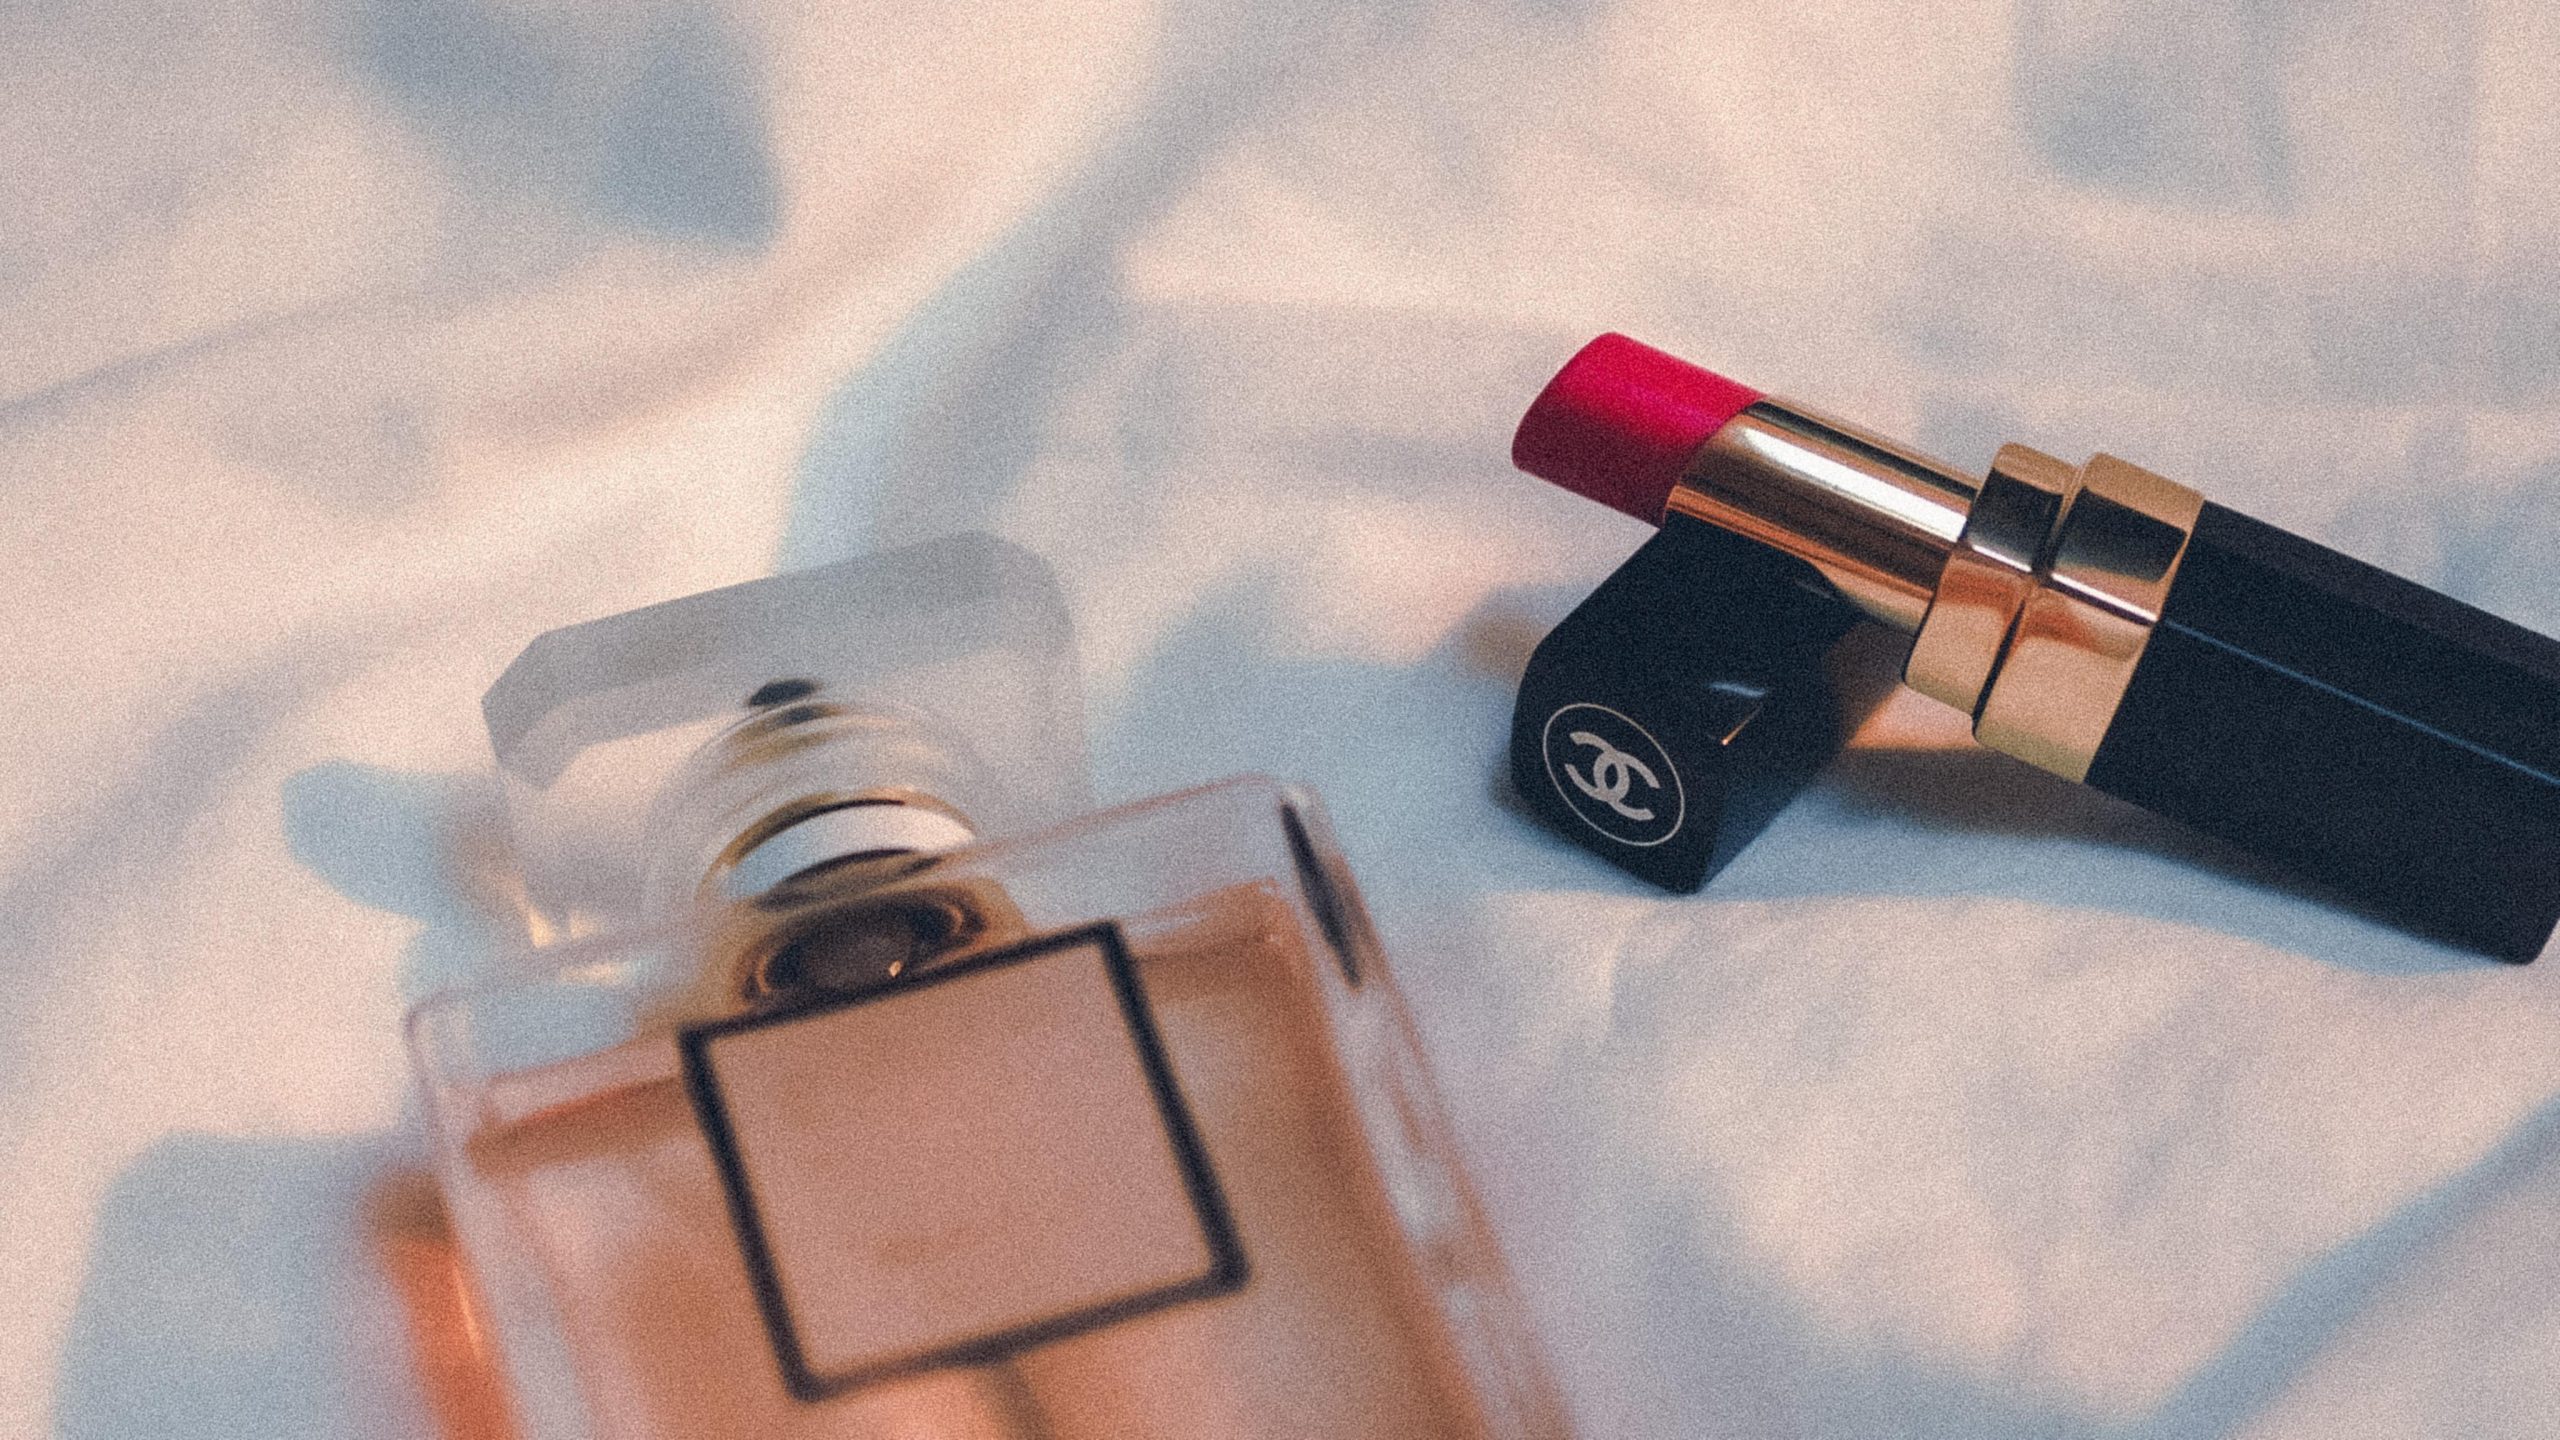 Chanel Red lipstick and perfume